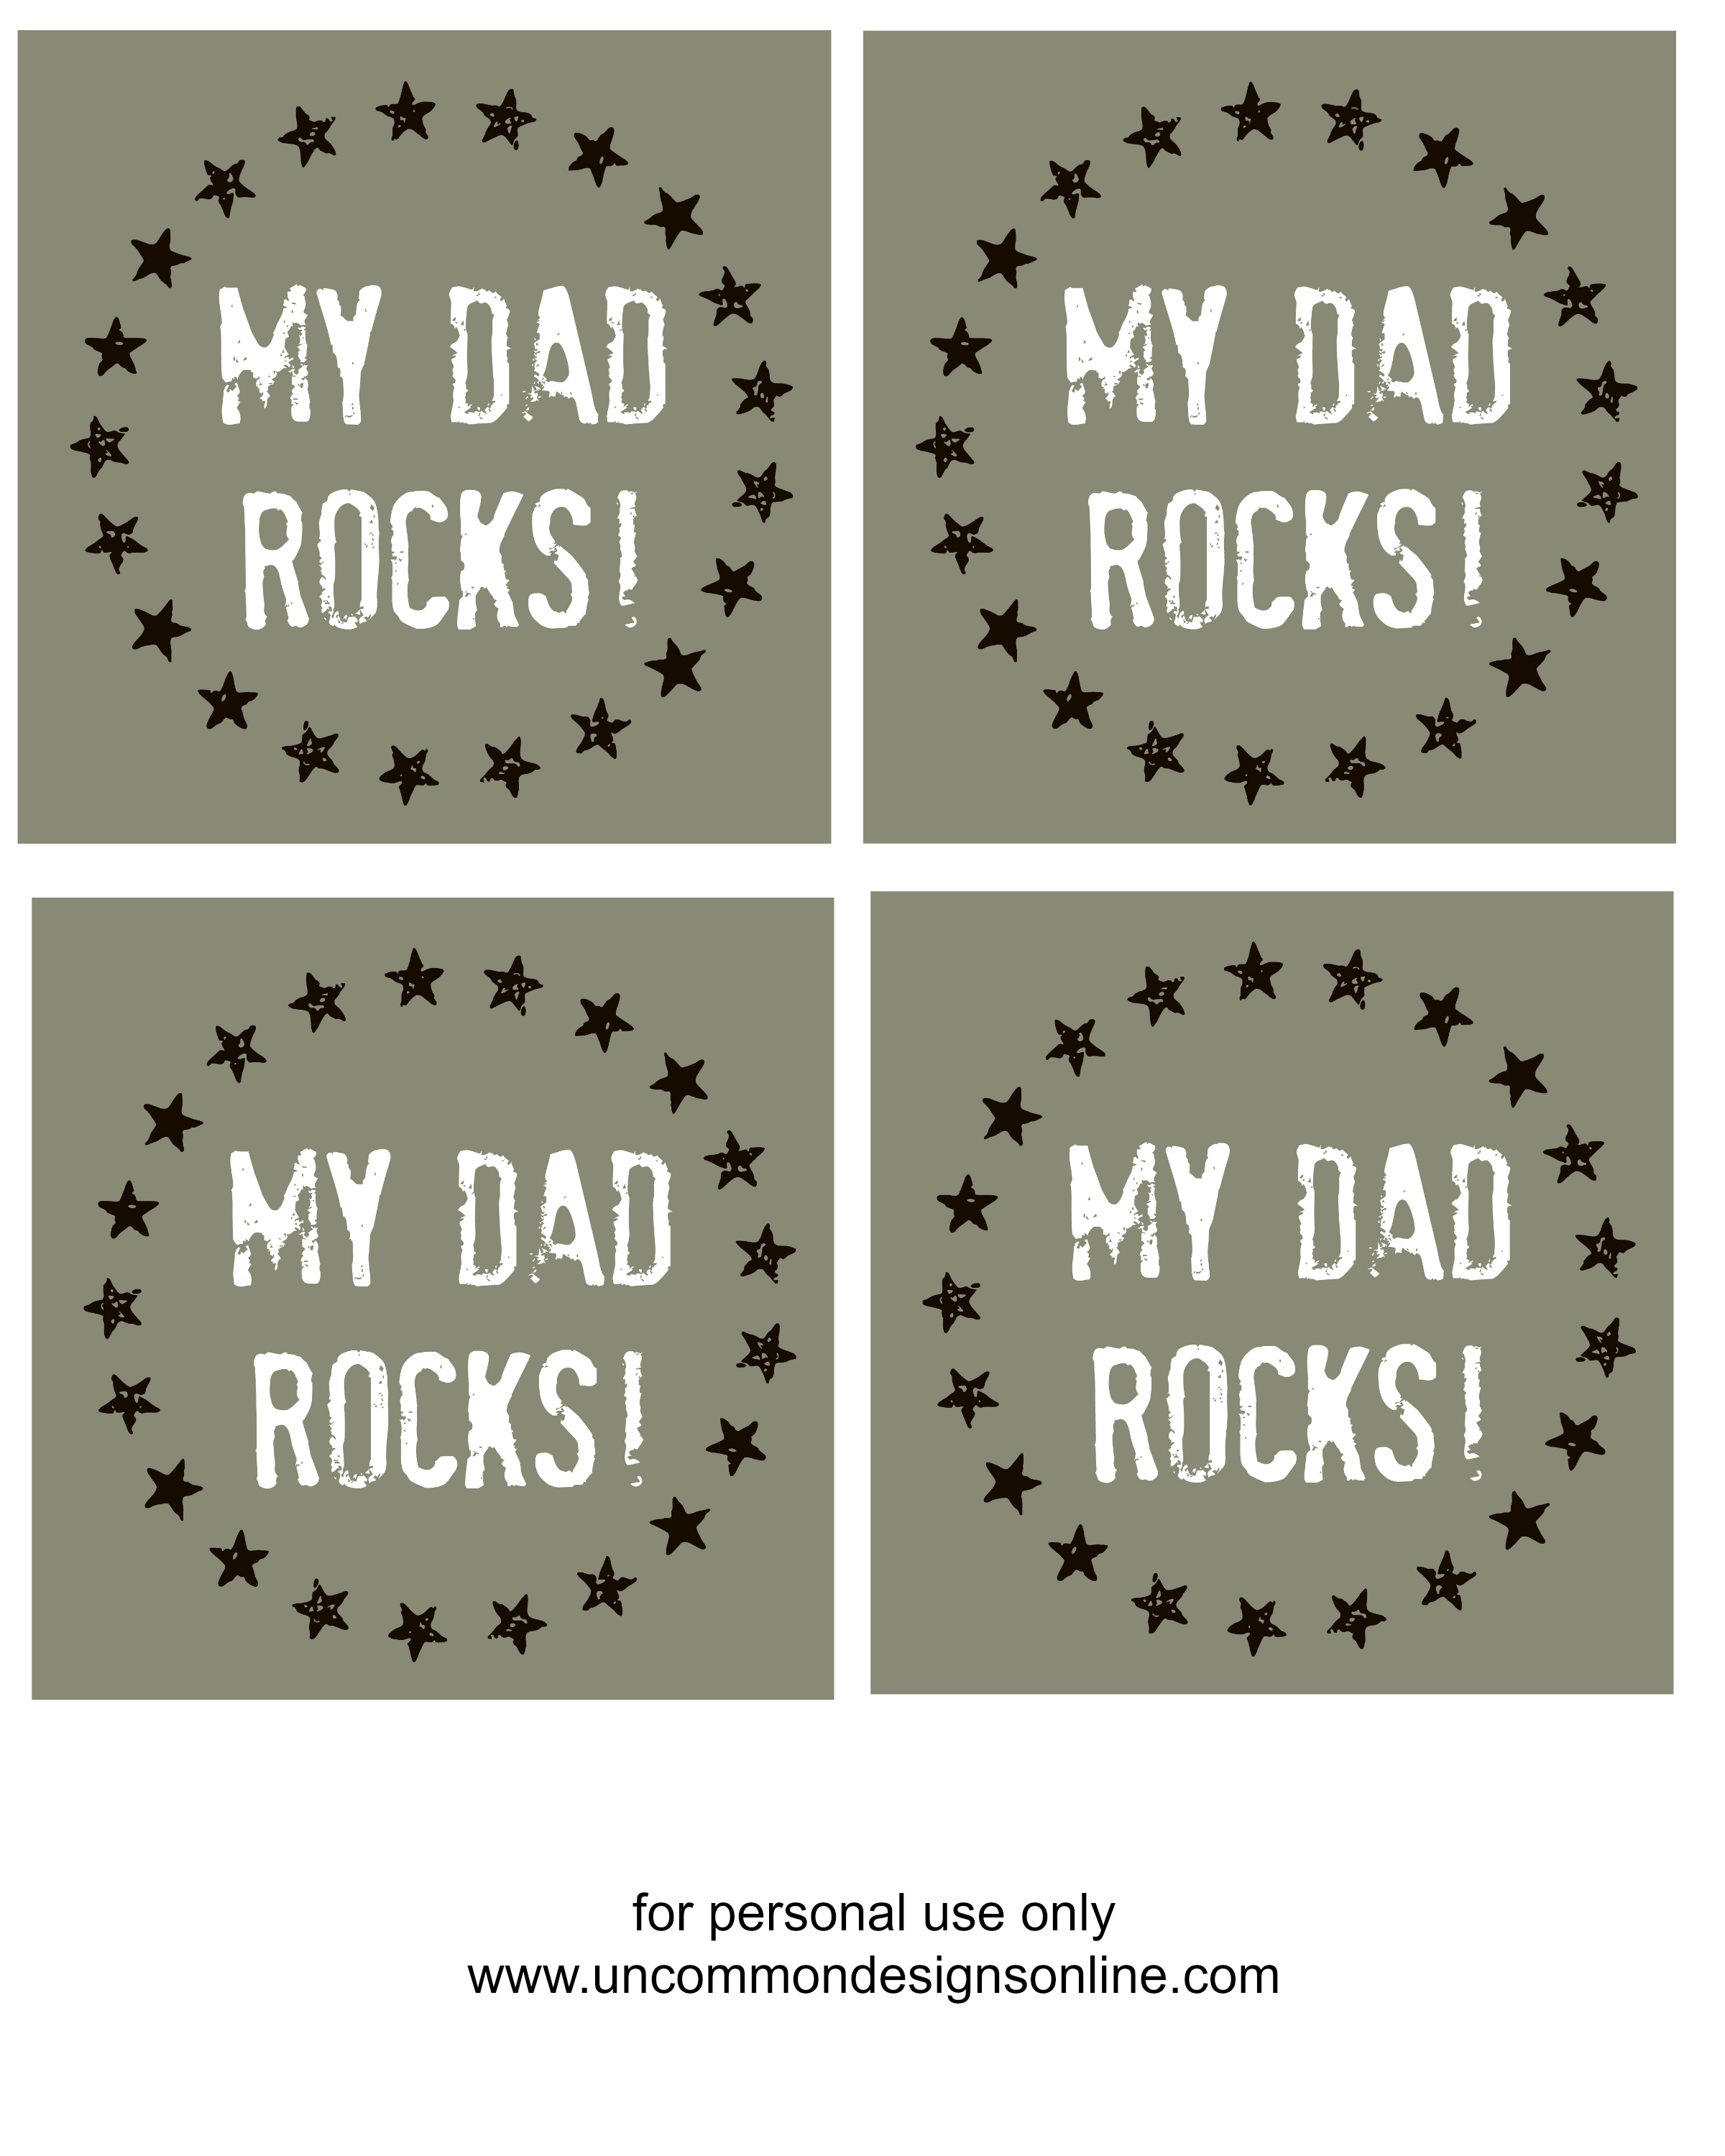 Fabulous Father's Day Gift Idea... a Wooden Bottle Caddy with free Printable "My Dad Rocks" tags!  www.uncommondesignsonline.com